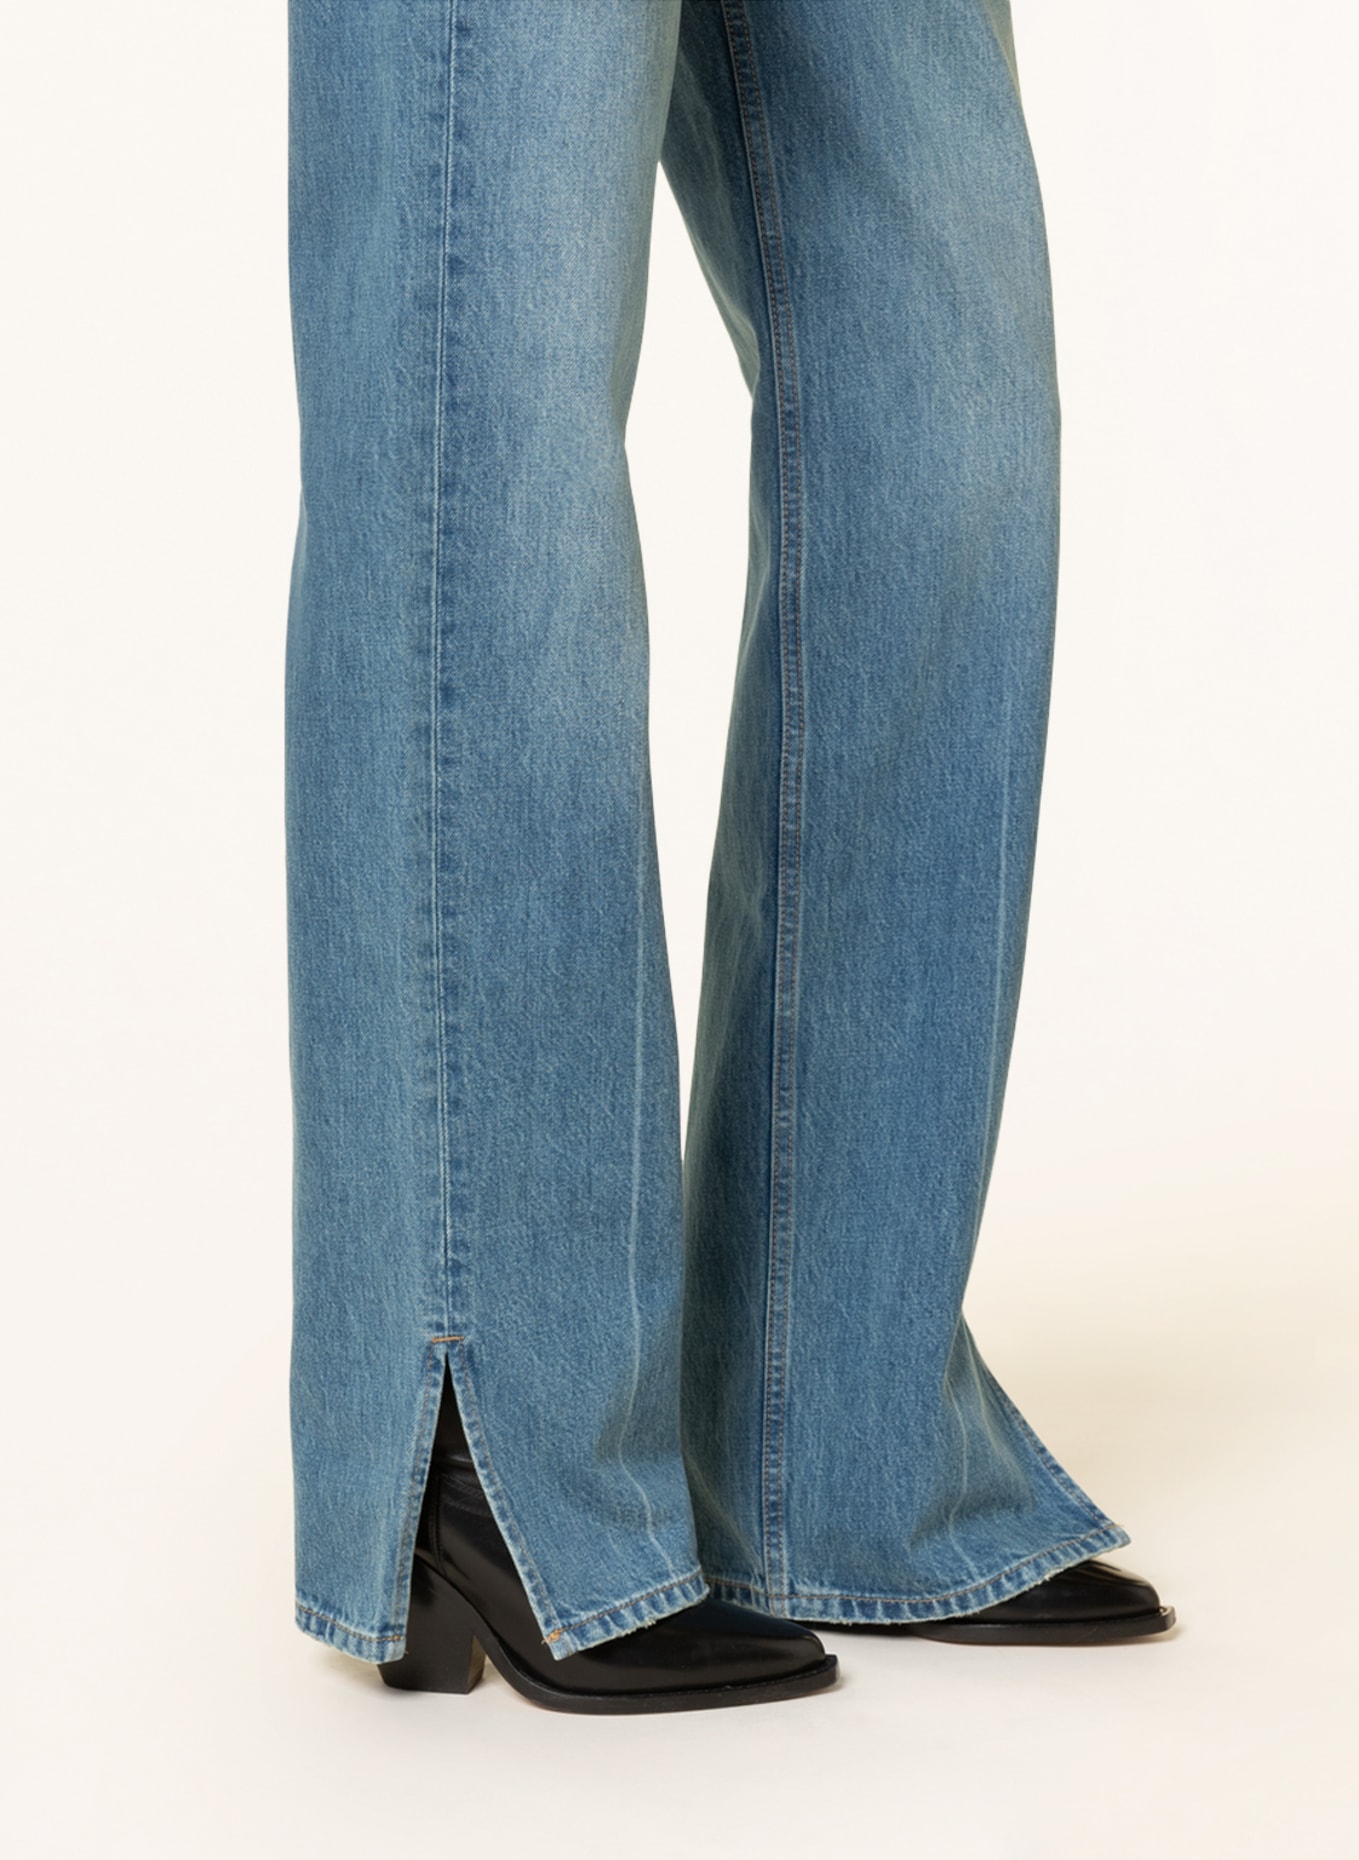 ANINE BING Straight Jeans ROY, Farbe: WASHED BLUE WASHED BLUE (Bild 5)